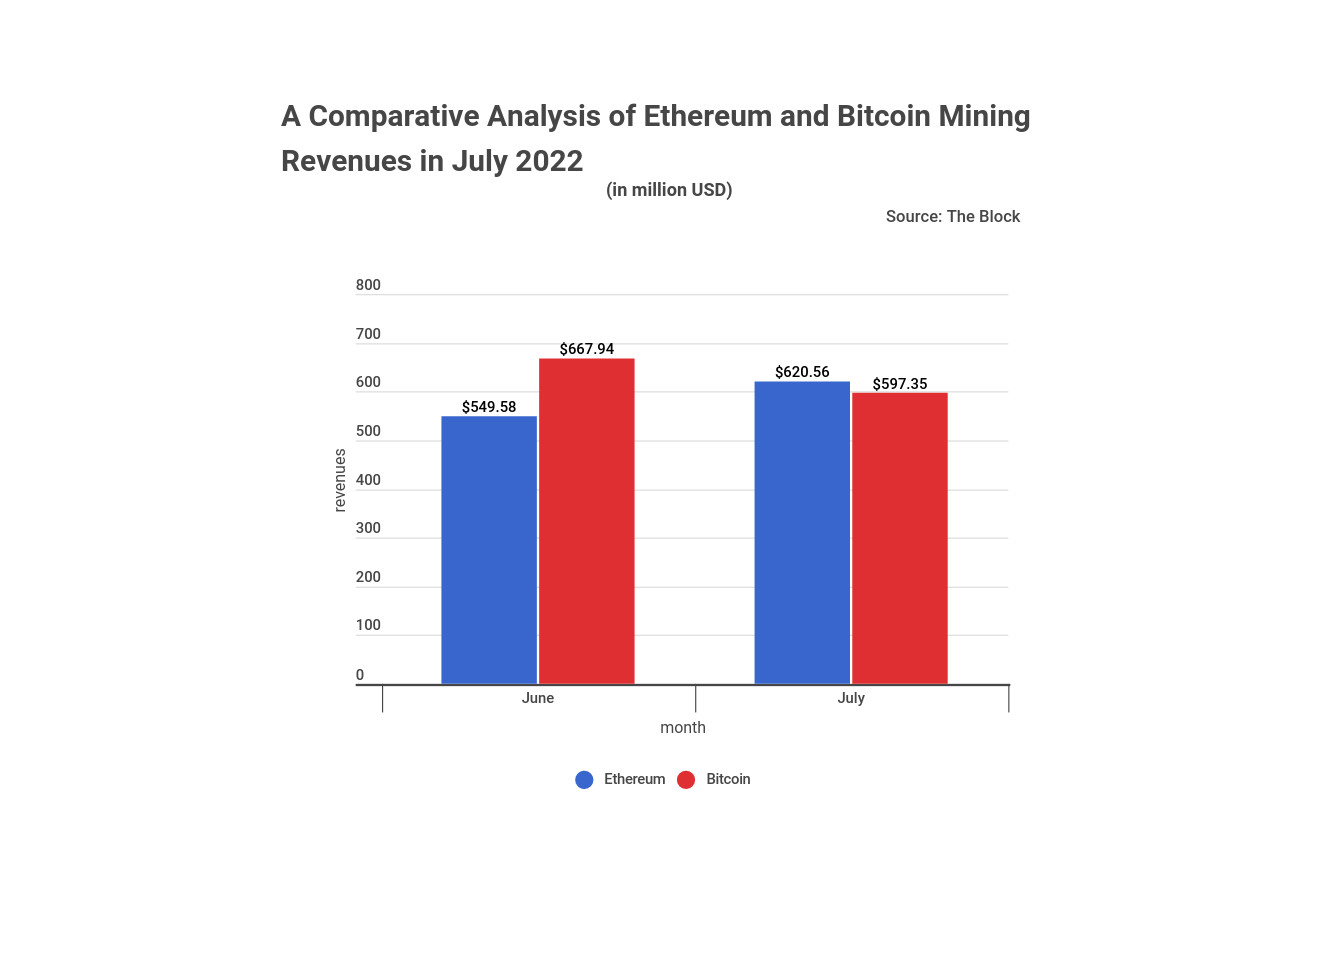 Ethereum’s July Miners‘ Revenues are Up 13% to Stand at $620M, Beating Bitcoin’s $597M